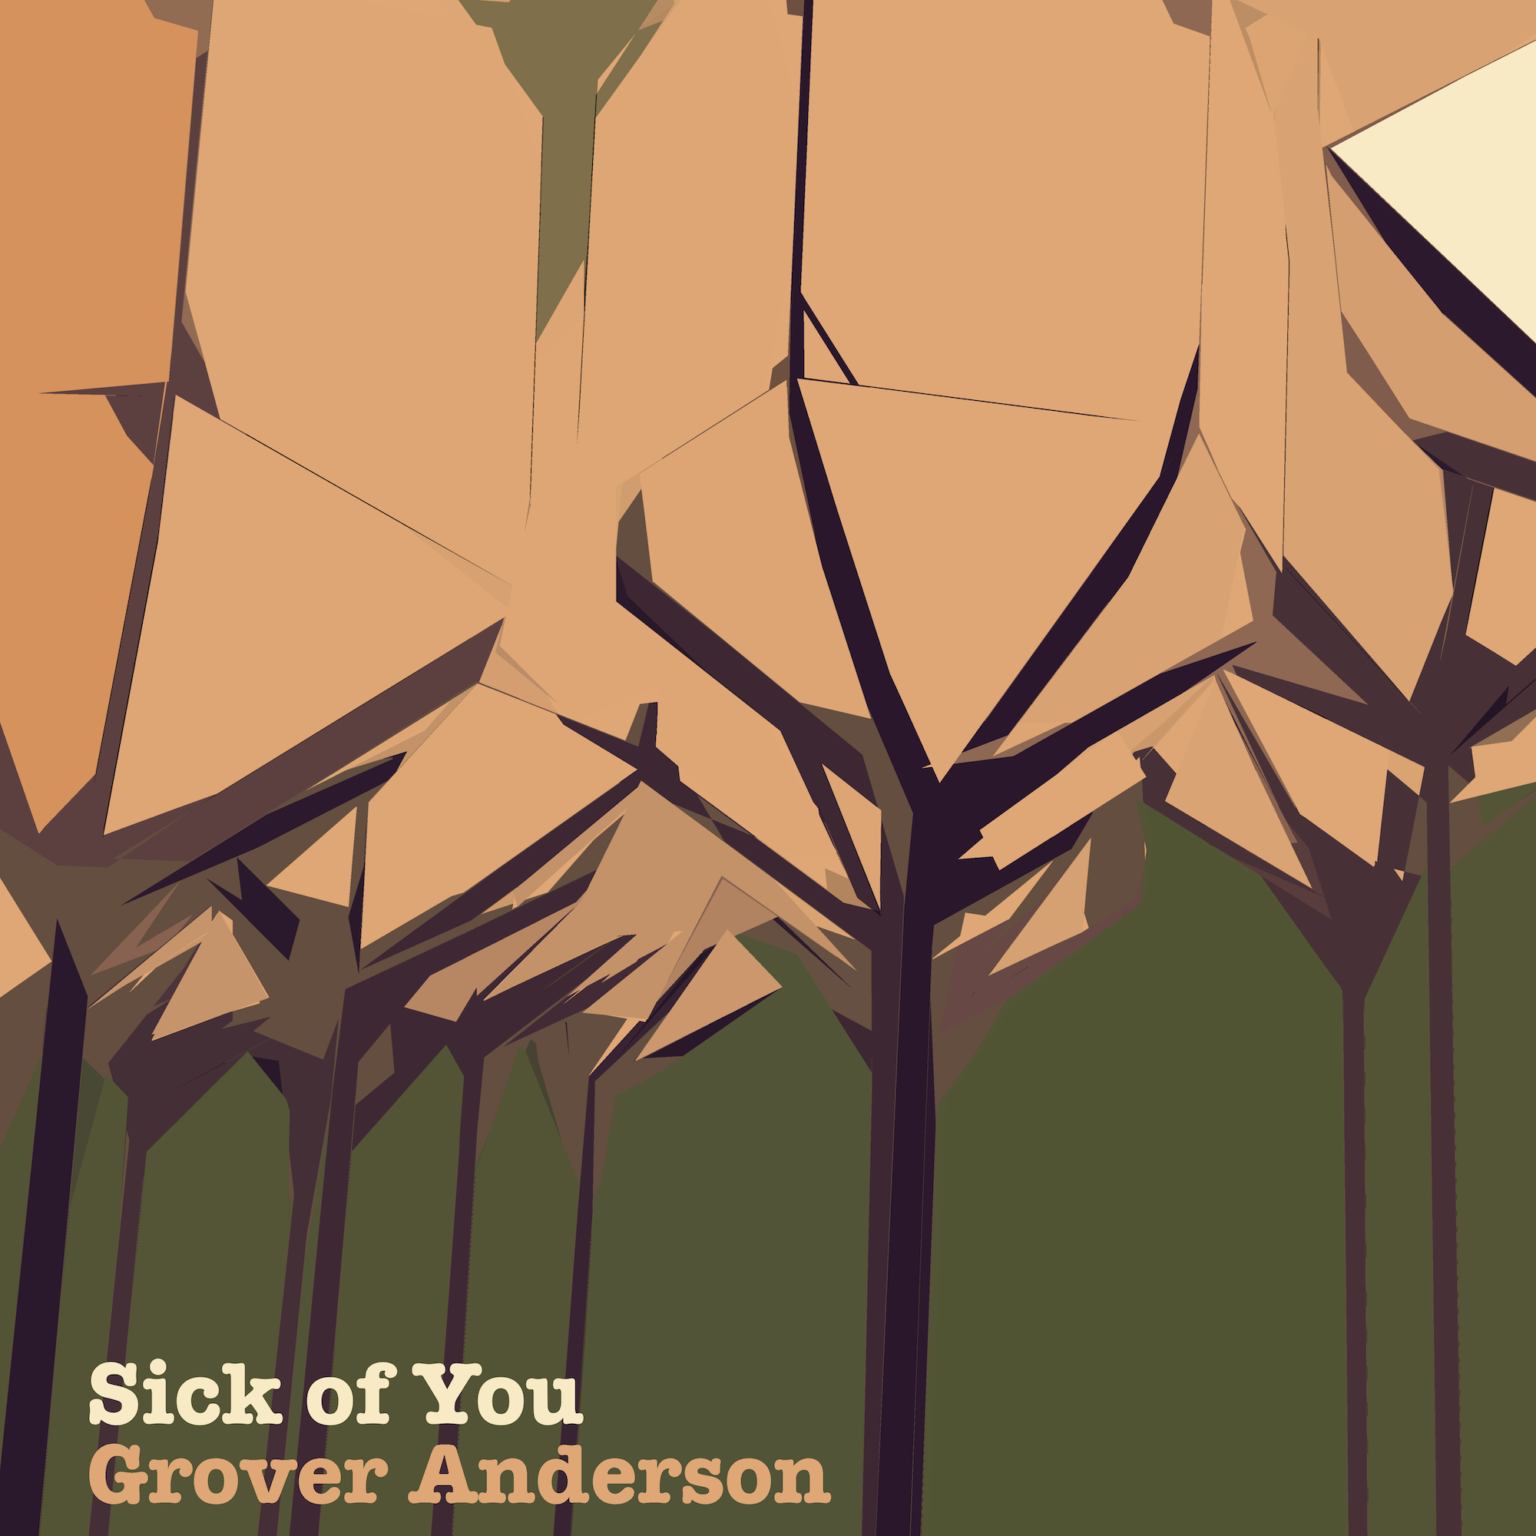 illustration of orange & purple lanterns on a green background with text "Sick of You / Grover Anderson"